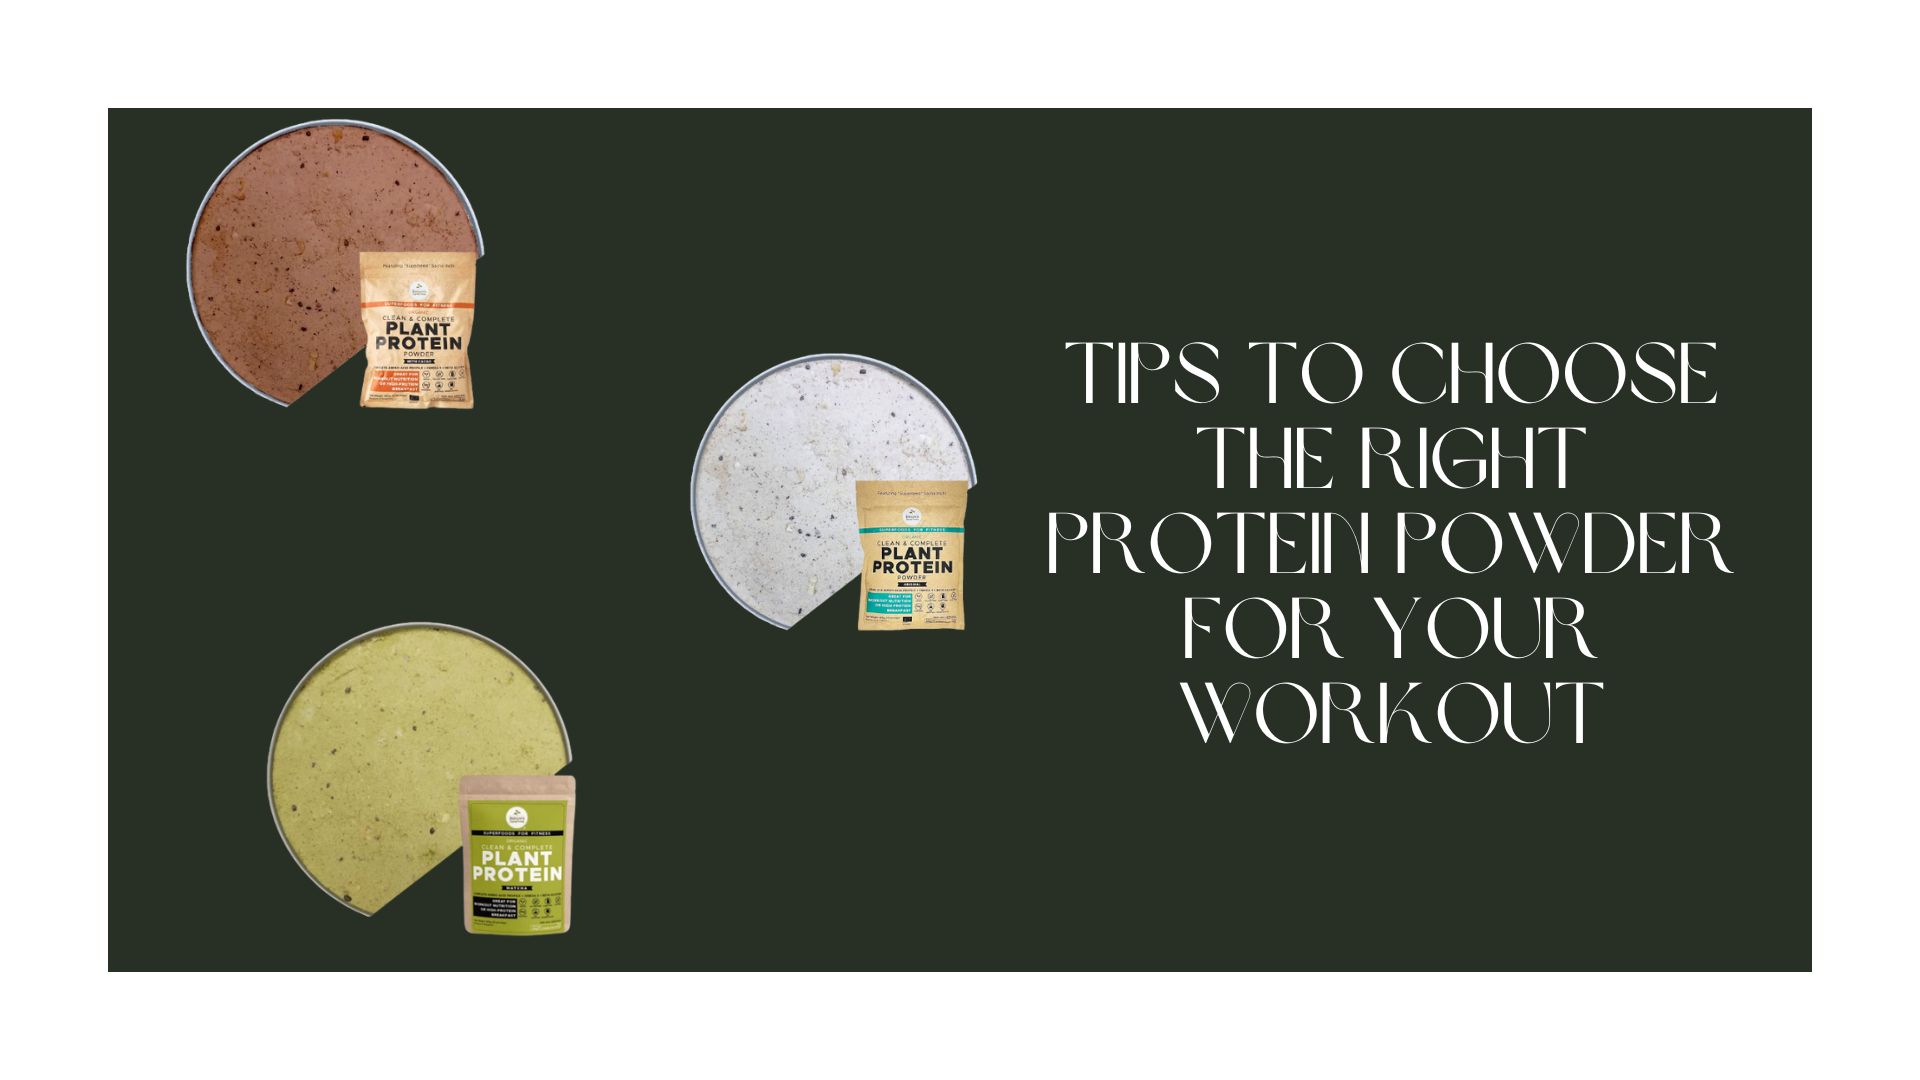 Tips To Choose The Right Protein Powder For Your Workout